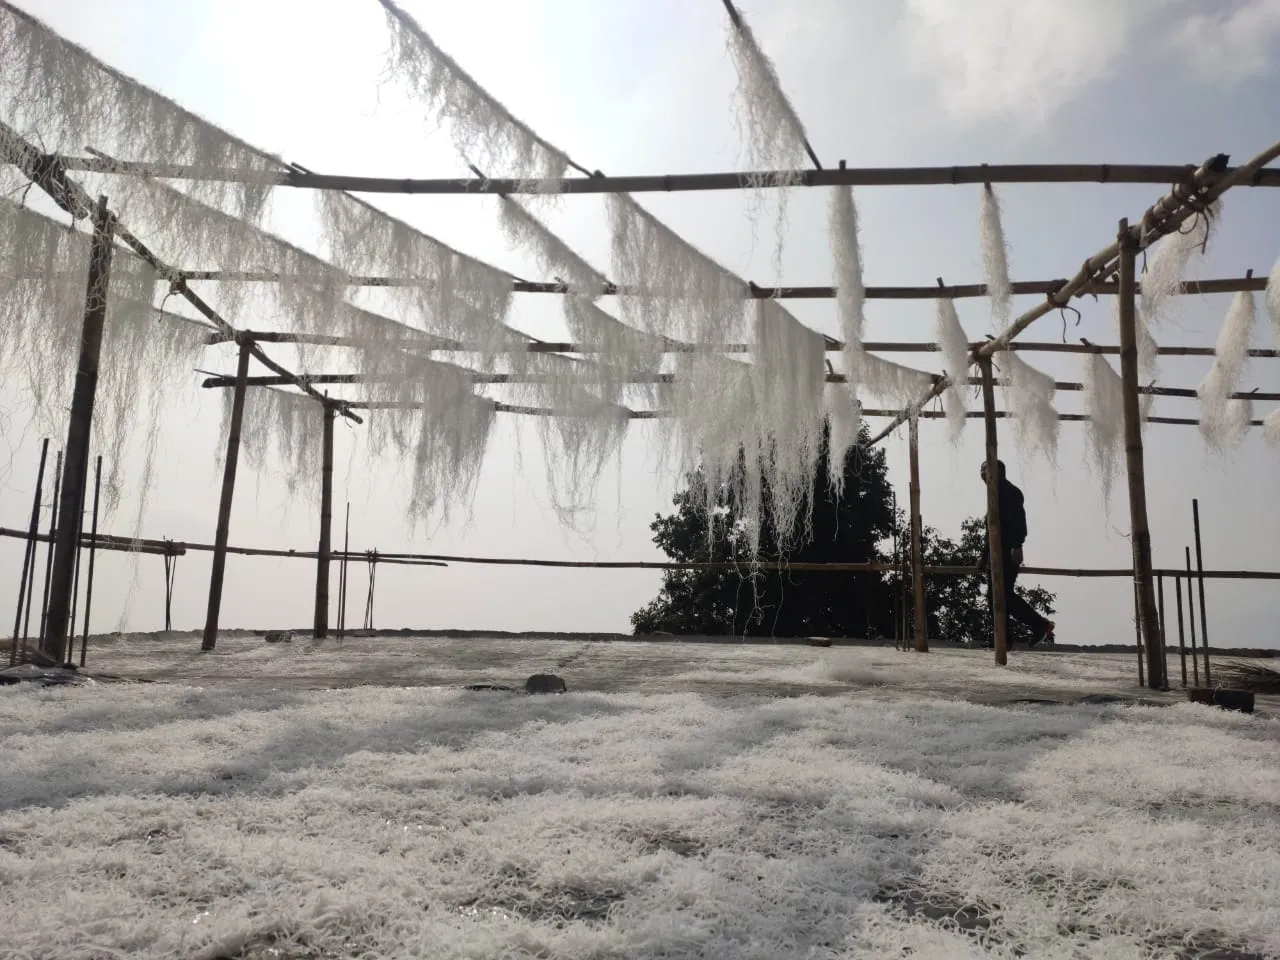 TourGenie_kalimpong_Phing drying